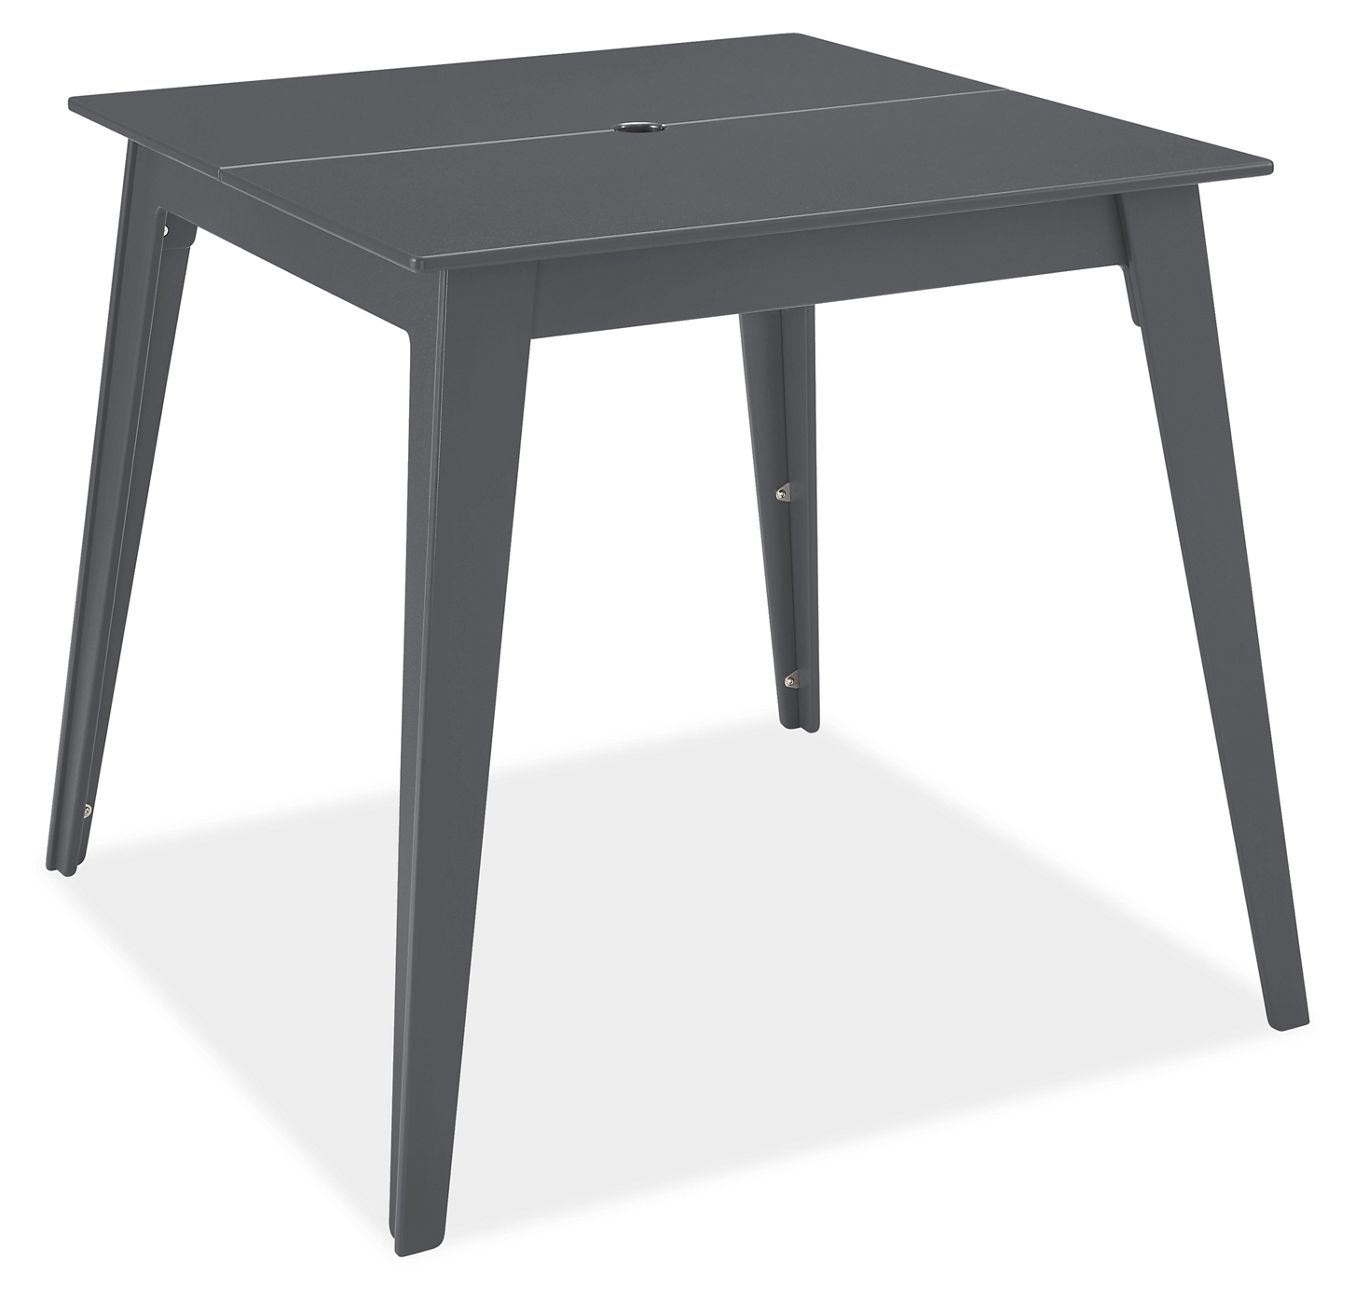 36" Square Counter Table, Employee Sale